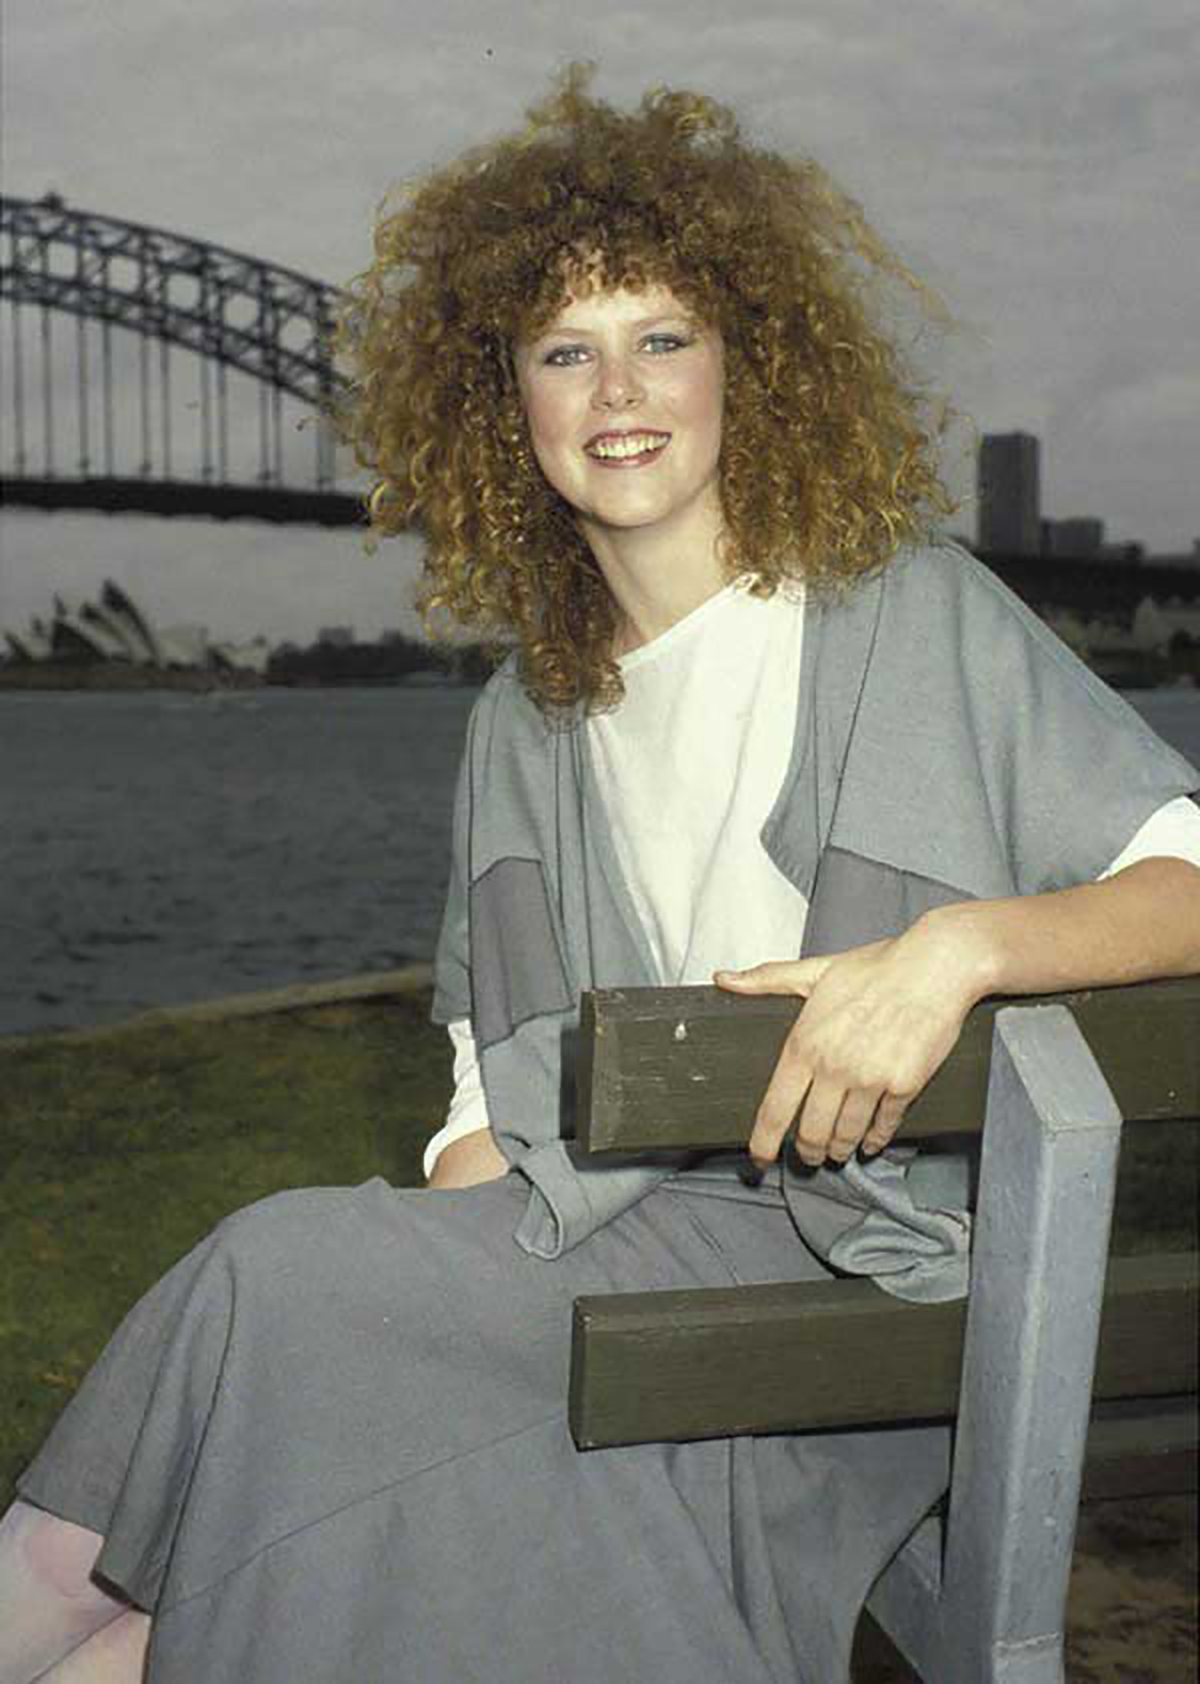 16-year-old Nicole Kidman doing a promo shoot for BMX Bandits (1983) in Sydney.